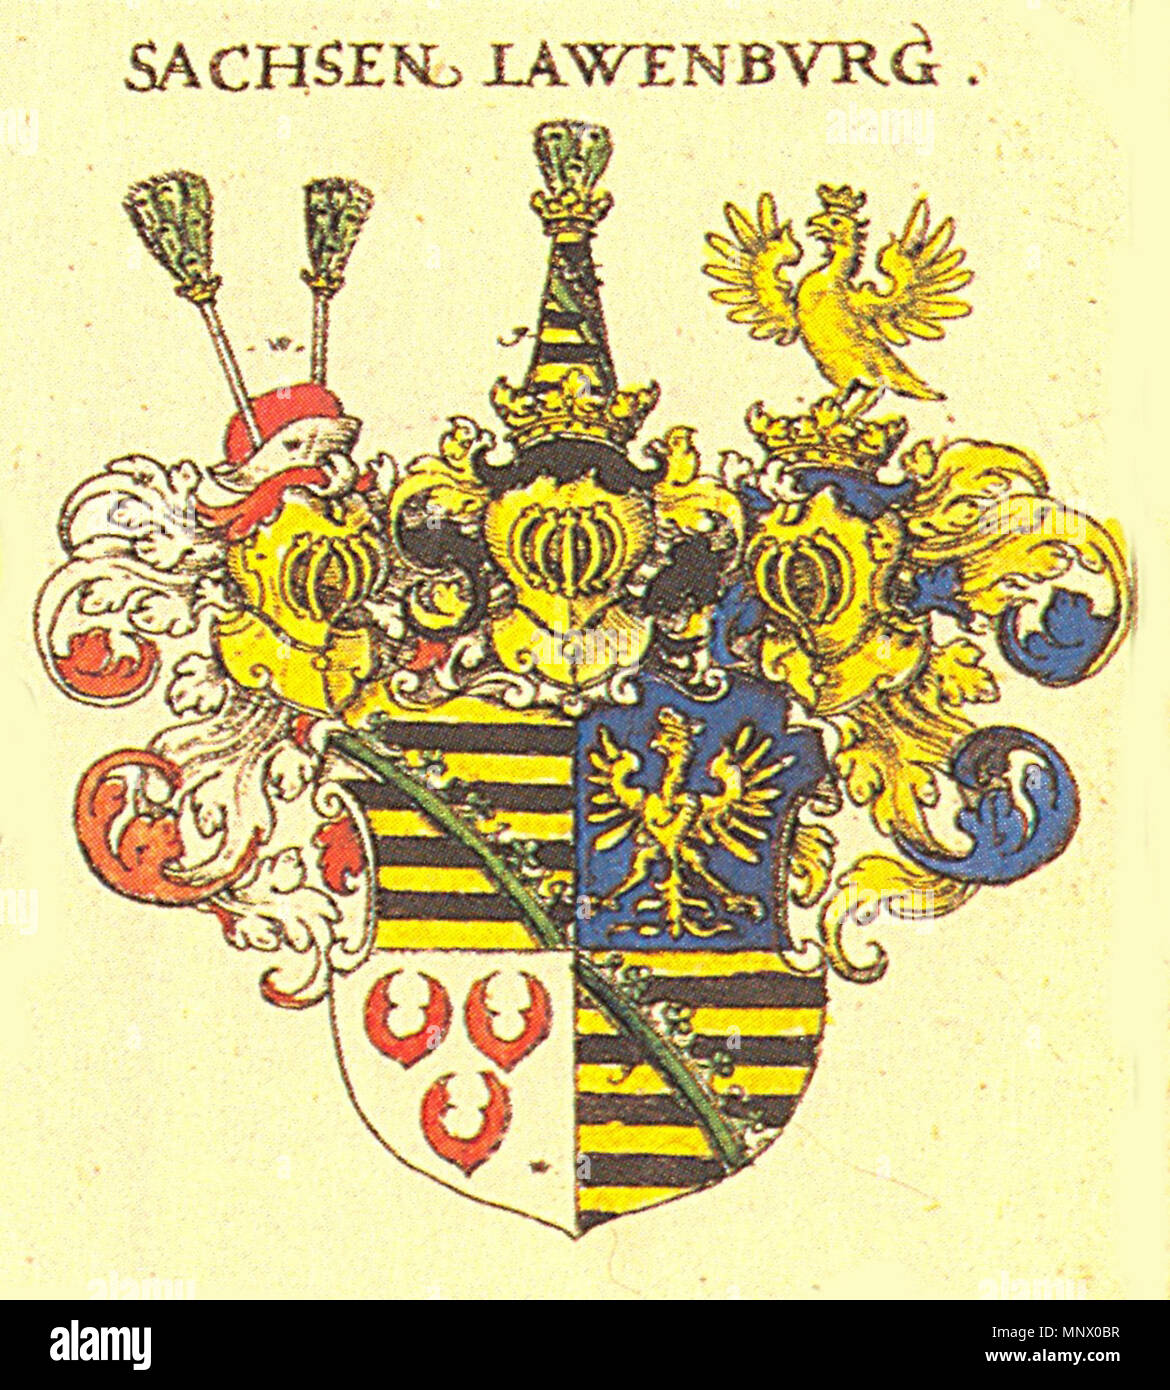 . Deutsch: Wappen des Herzogtums Sachsen-Lauenburg zwischen ca. 1507 bis 1671. English: The coat of arms of Duchy of Saxony, Angria and Westphalia (Lauenburg) as used between 1507 and 1671. It shows in the upper left quarter the Ascanian barry of ten, in or and sable, covered by a crancelin of rhombs (they are not shown in this undetailed copy) bendwise in vert.[1] The crancelin symbolises the Saxon ducal crown. The second quarter shows in azure an eagle crowned in or, representing the imperial Pfalzgraviate of Saxony. The third quarter displays in argent three water-lily leaves in gules, stan Stock Photo